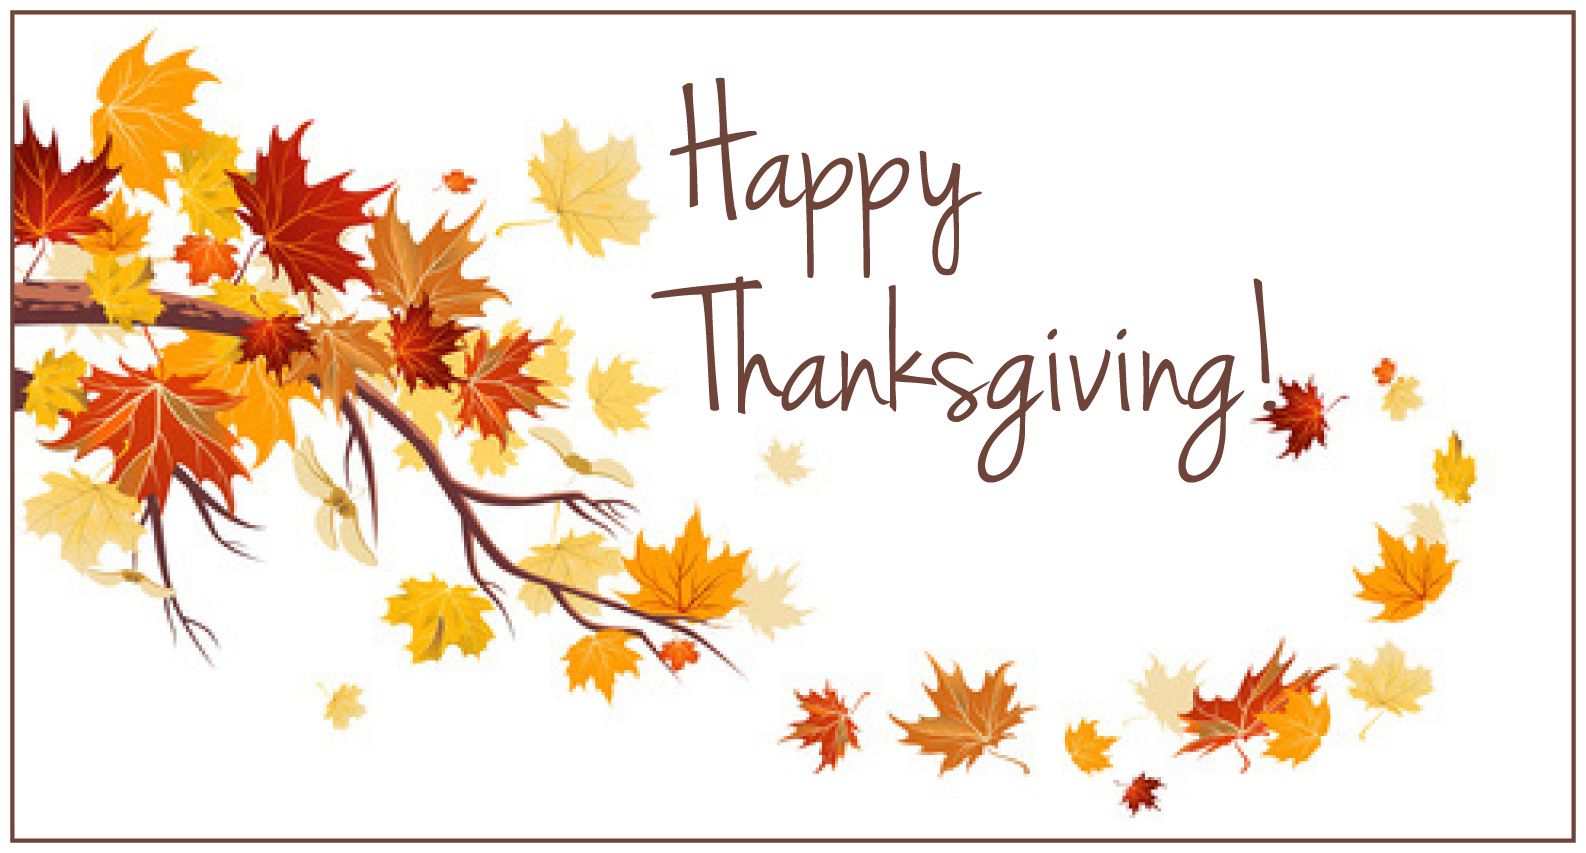 Free Happy Thanksgiving Image for Facebook [2020]